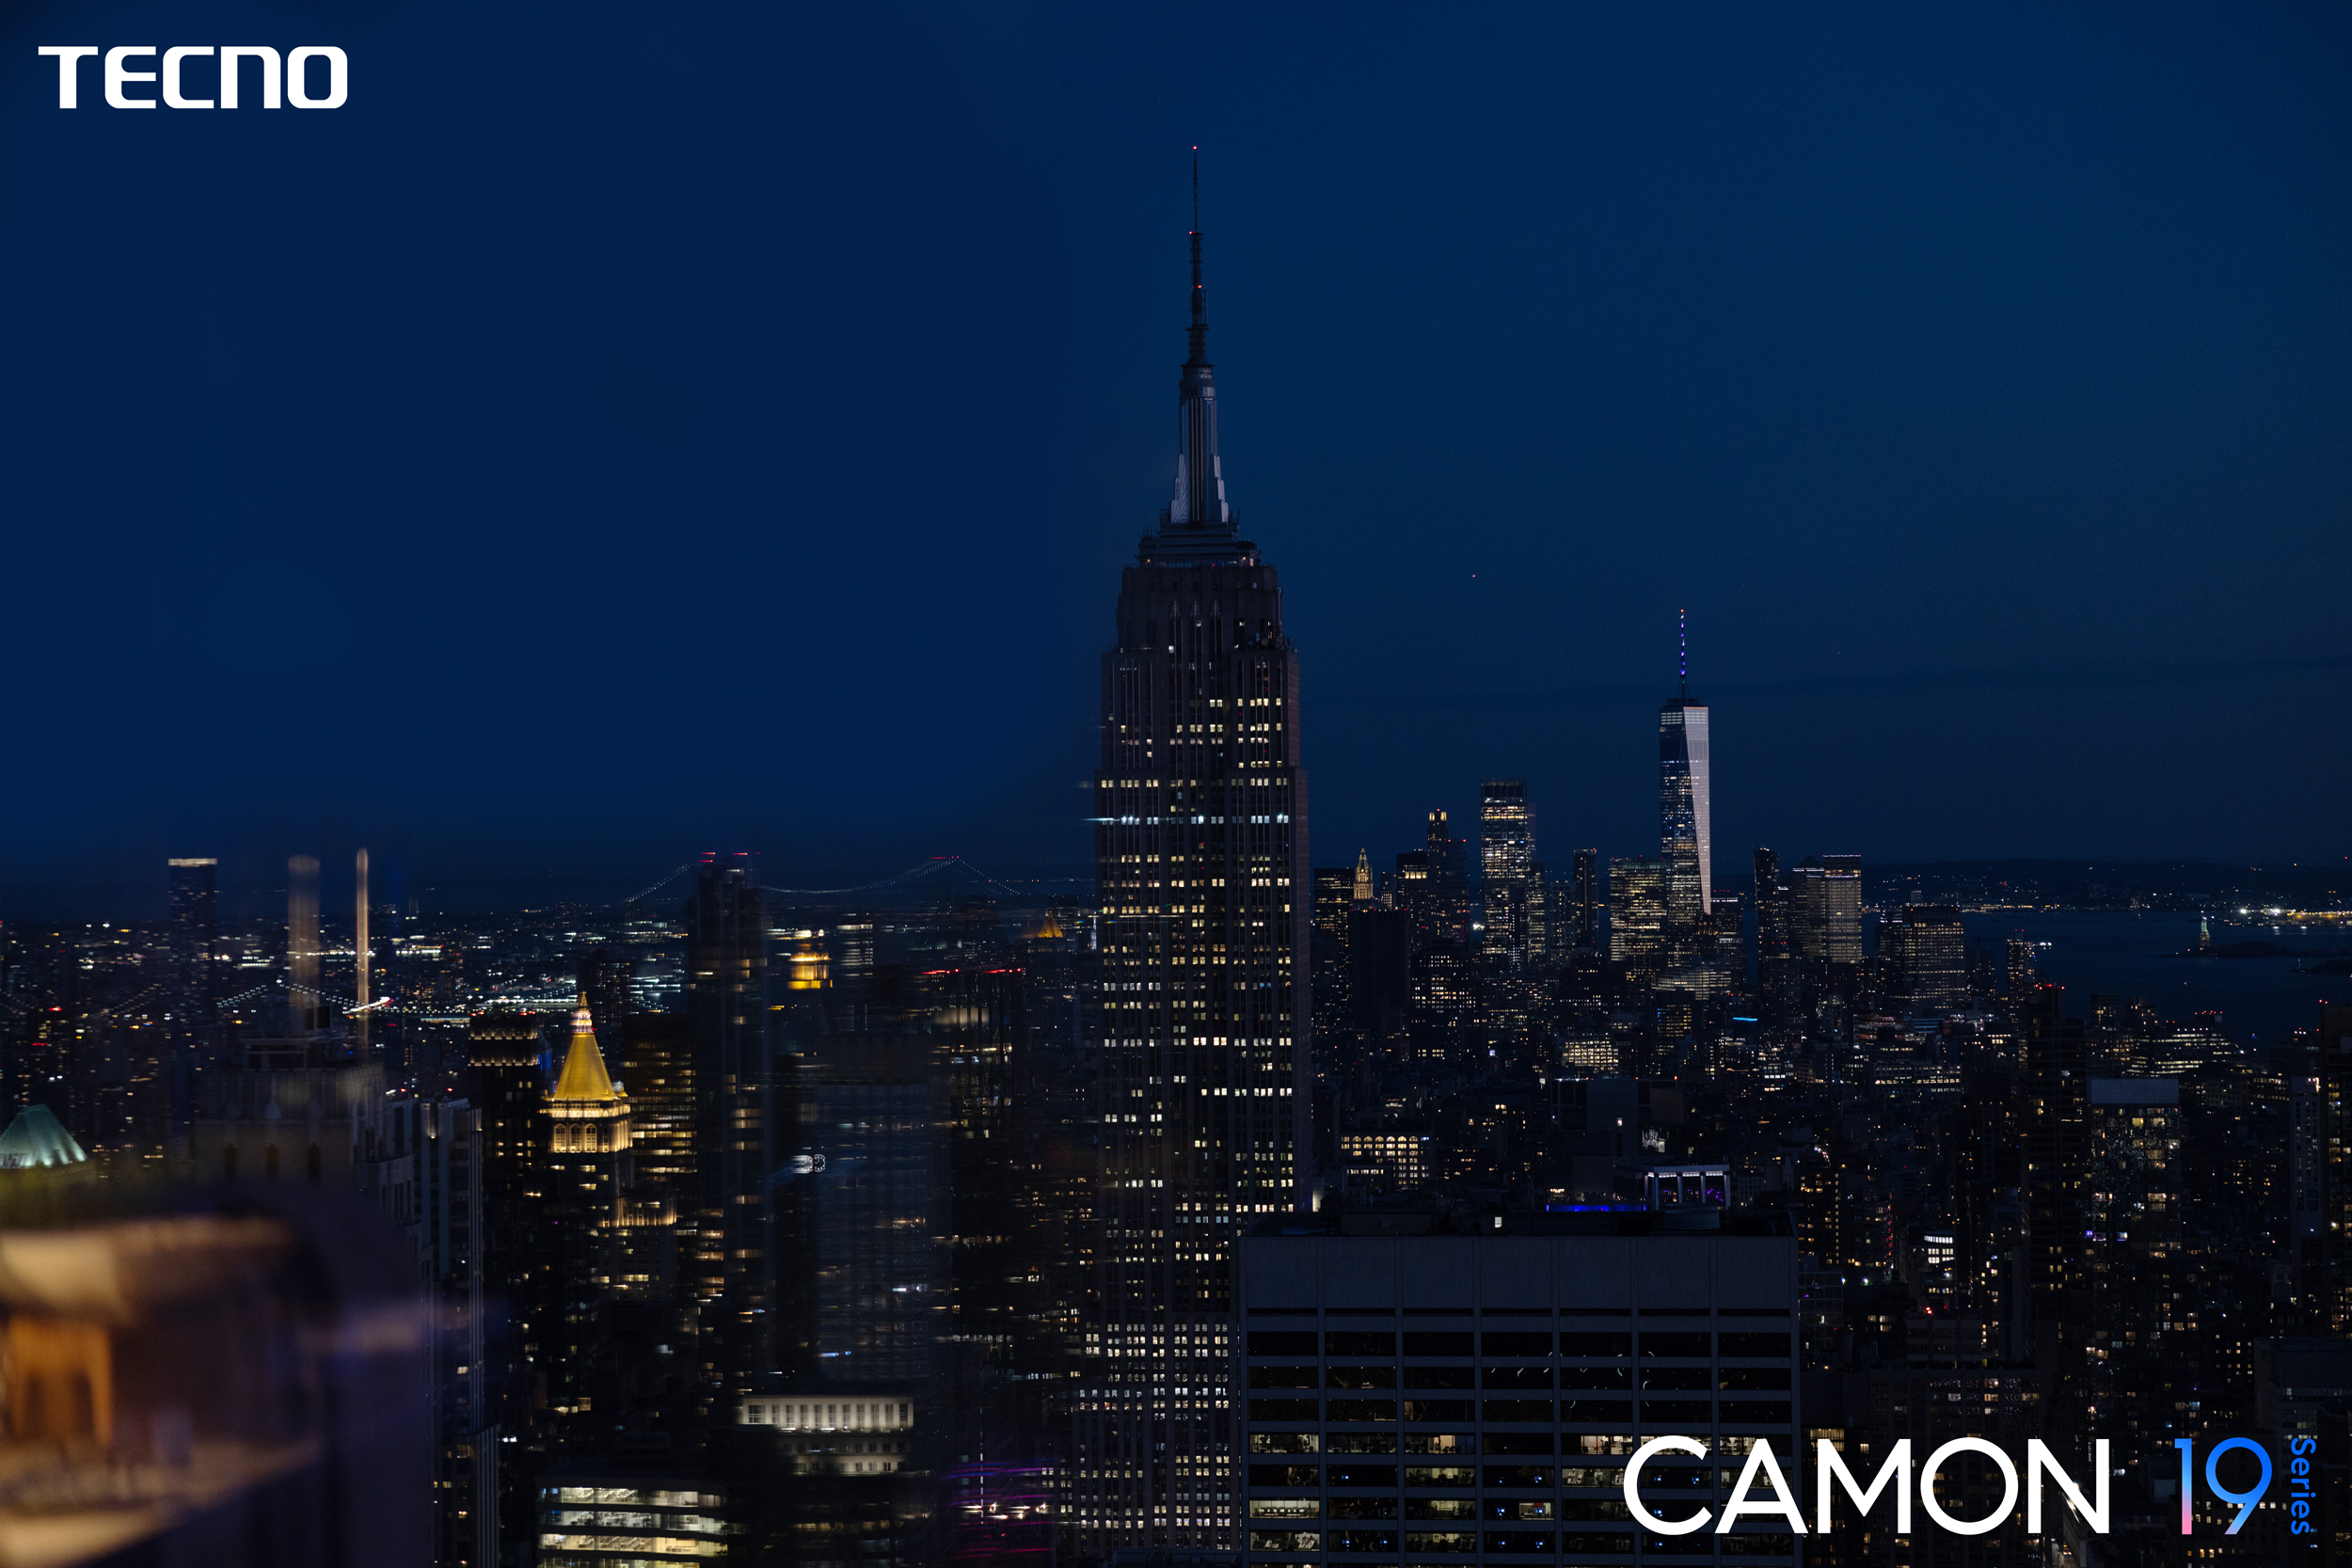 TECNO Held the World's Most Stylish Smartphone Launch in New York City with Dazzling Debut of CAMON 19 Series